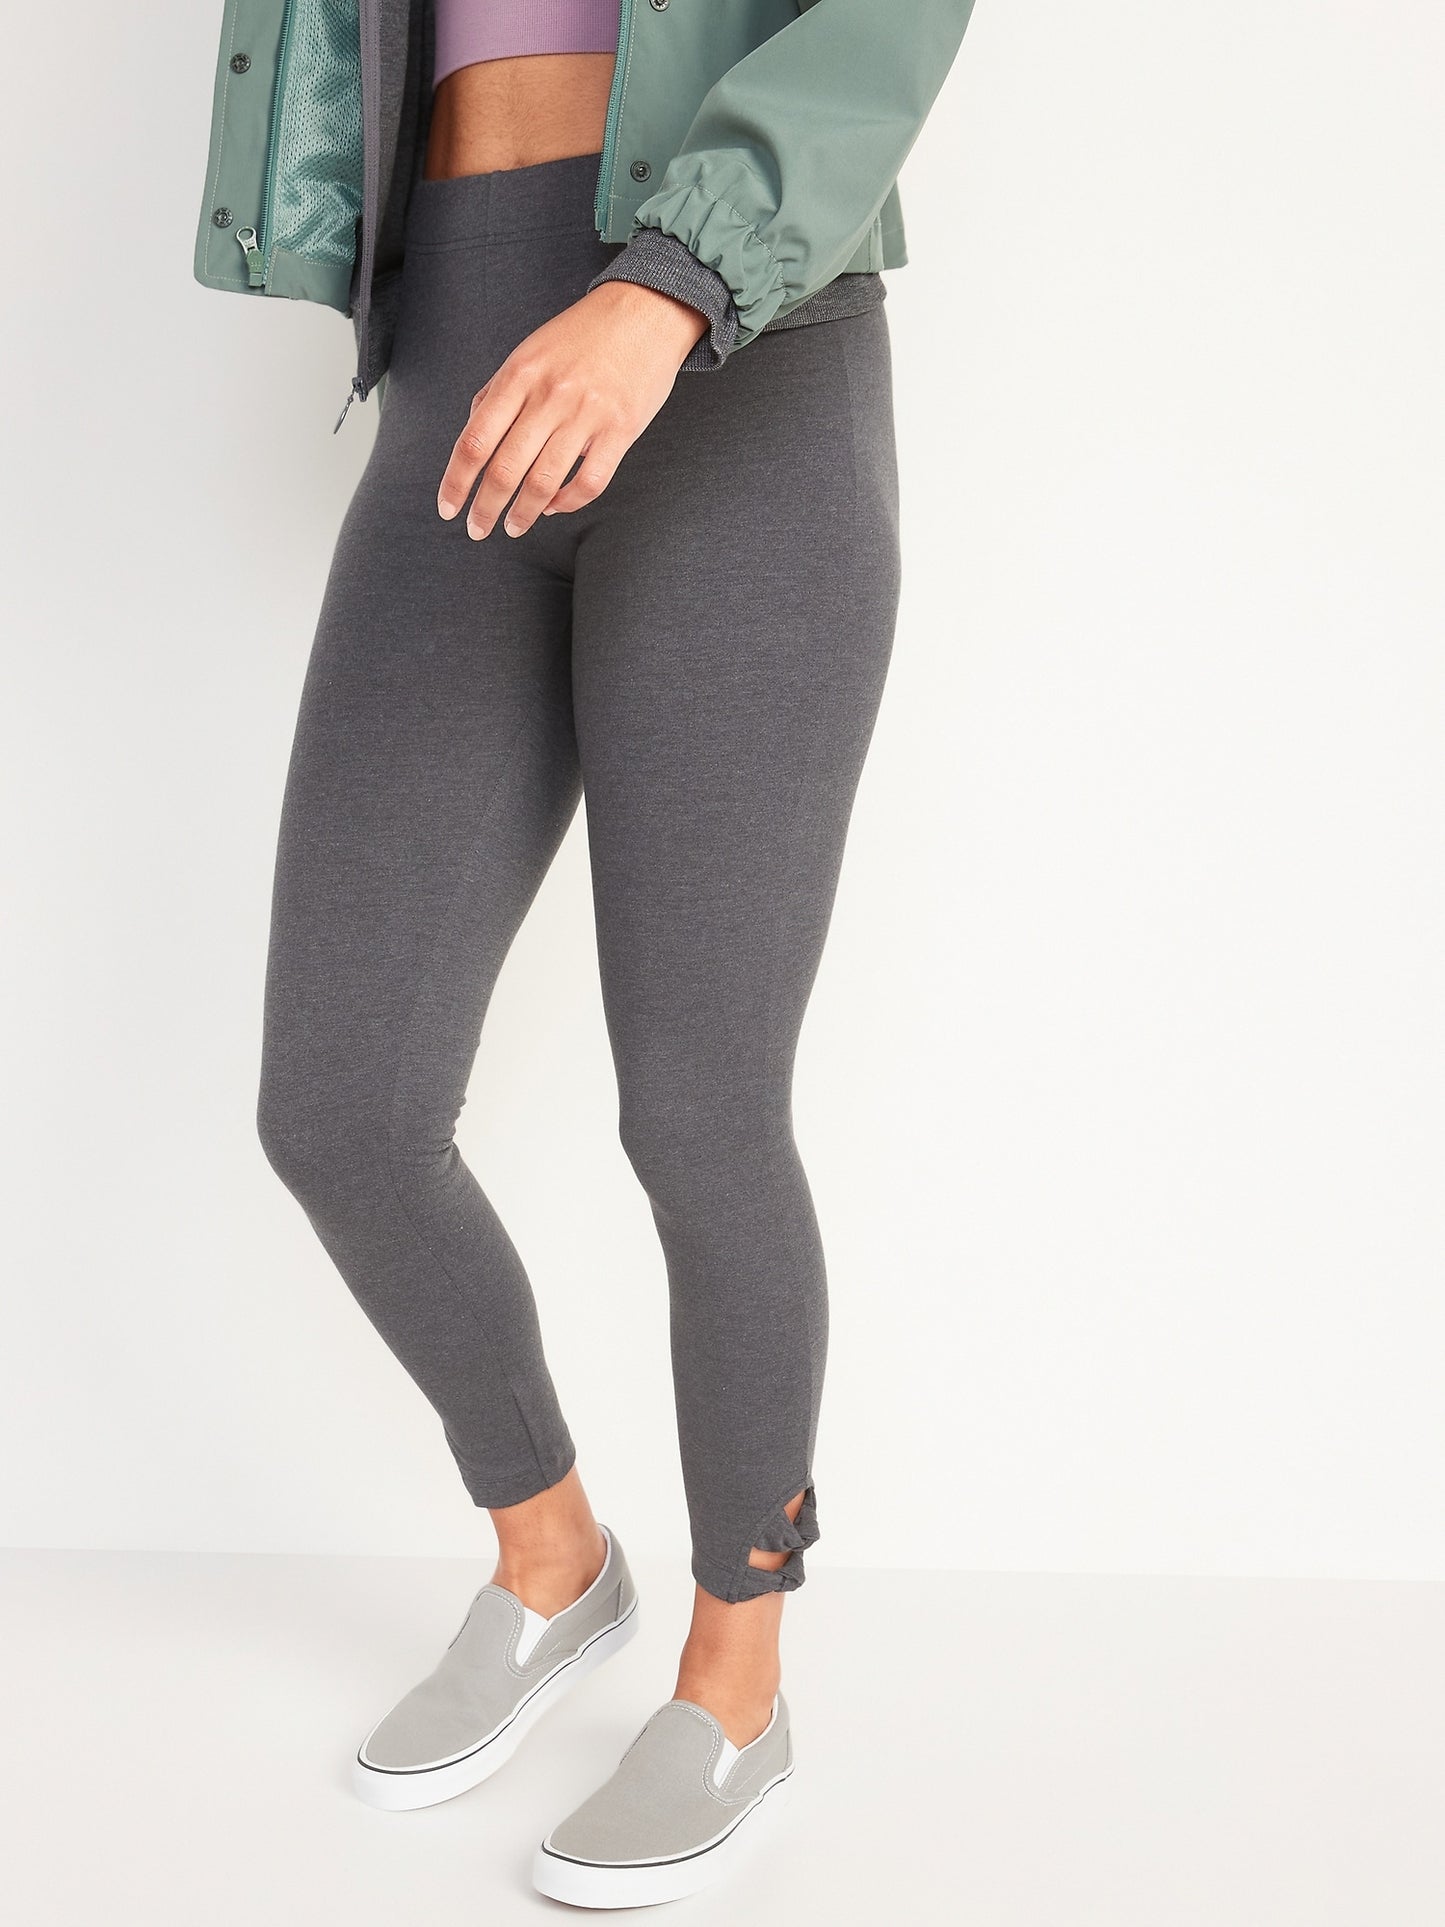 ON High-Waisted Double-Knot Ankle Leggings For Women - Heather Grey